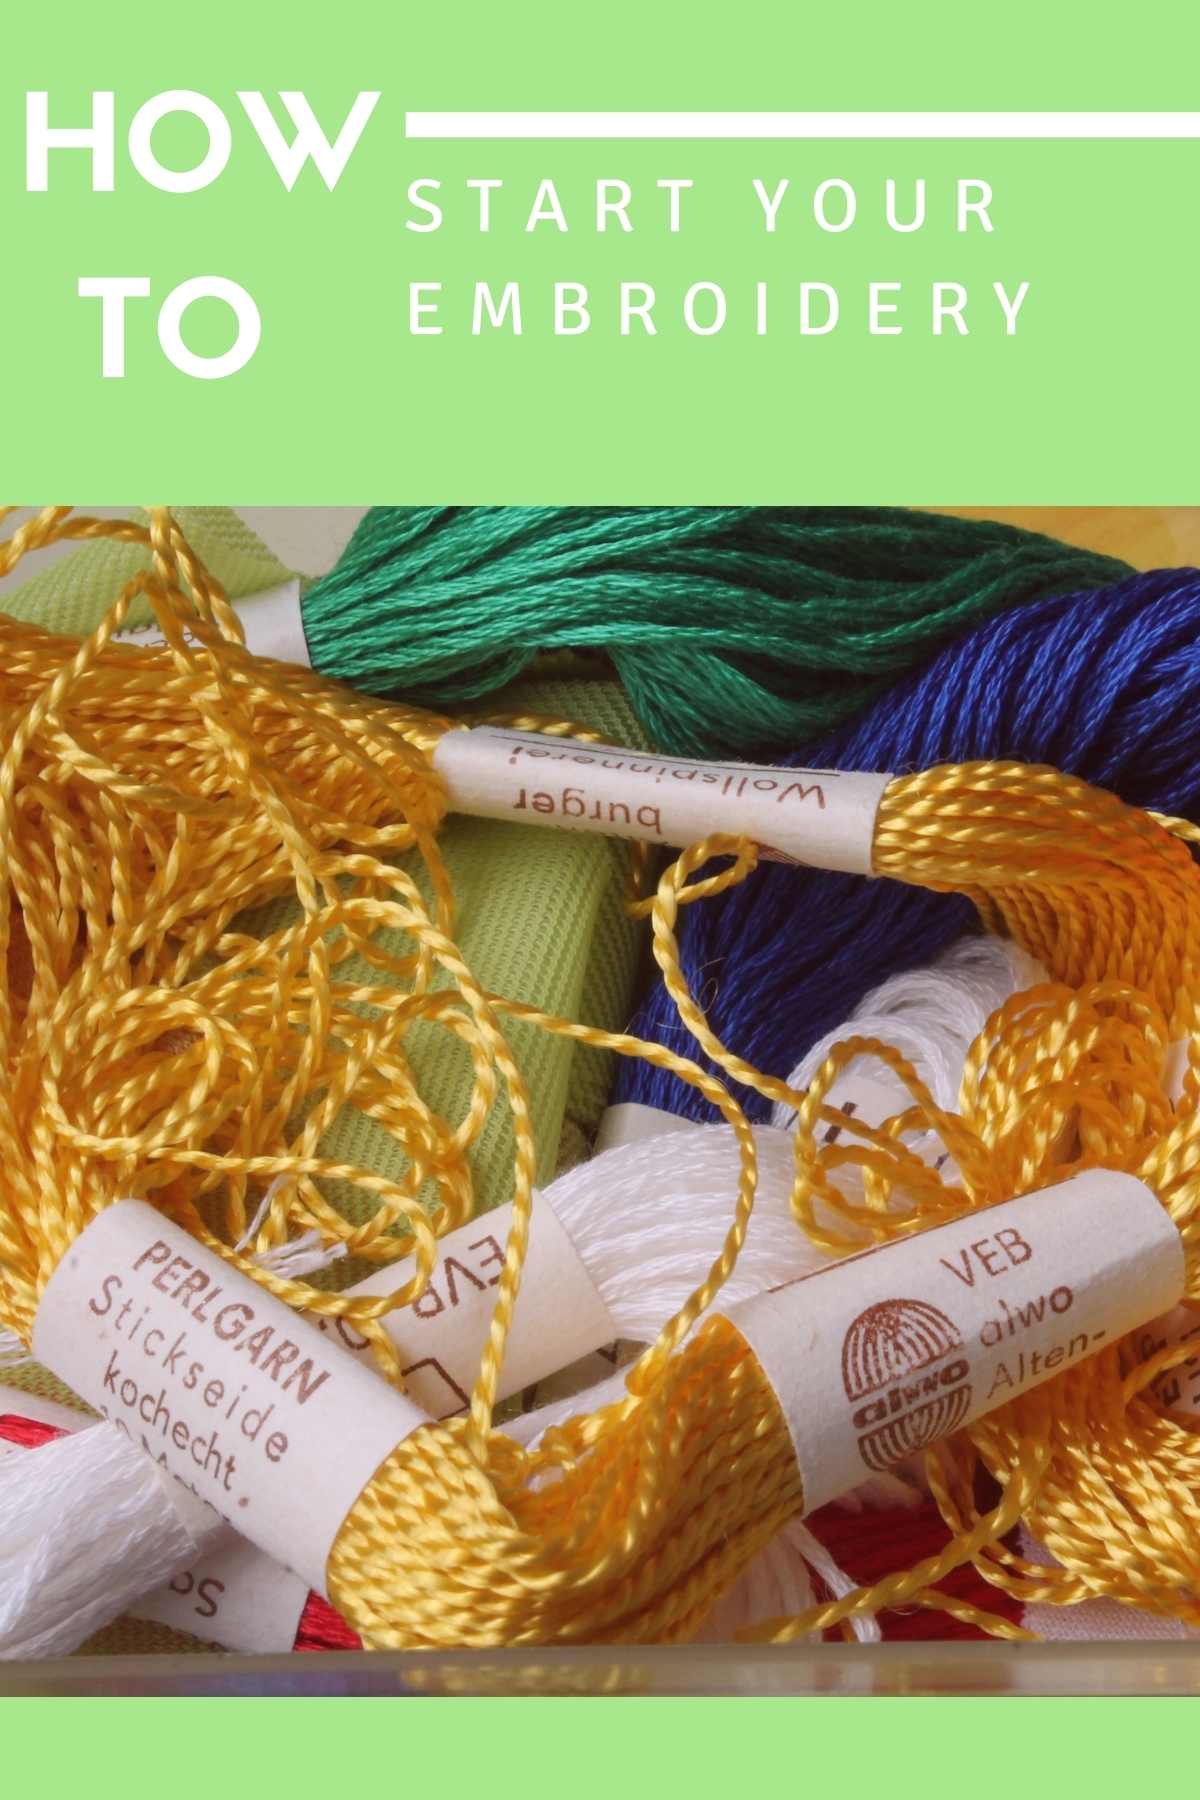 How to start your embroidery for display